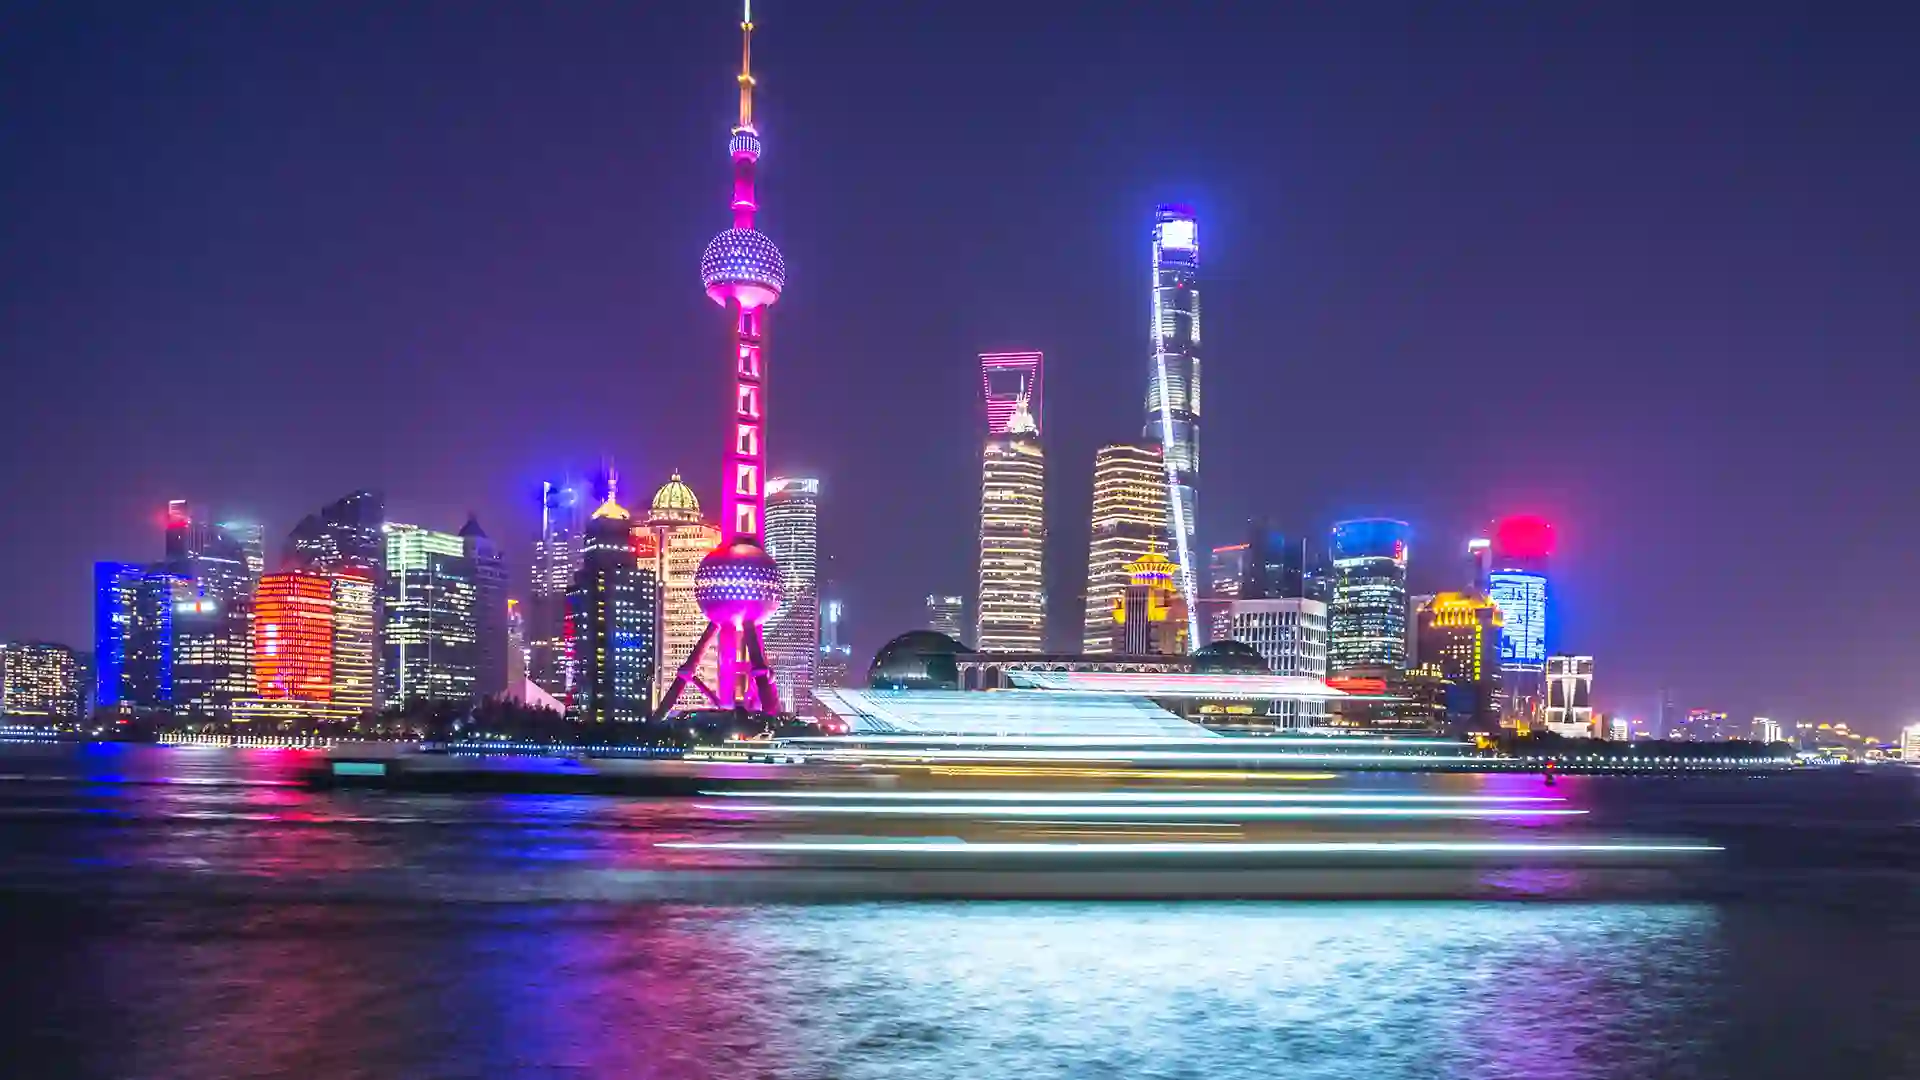 View of Shanghai's city lights at night.